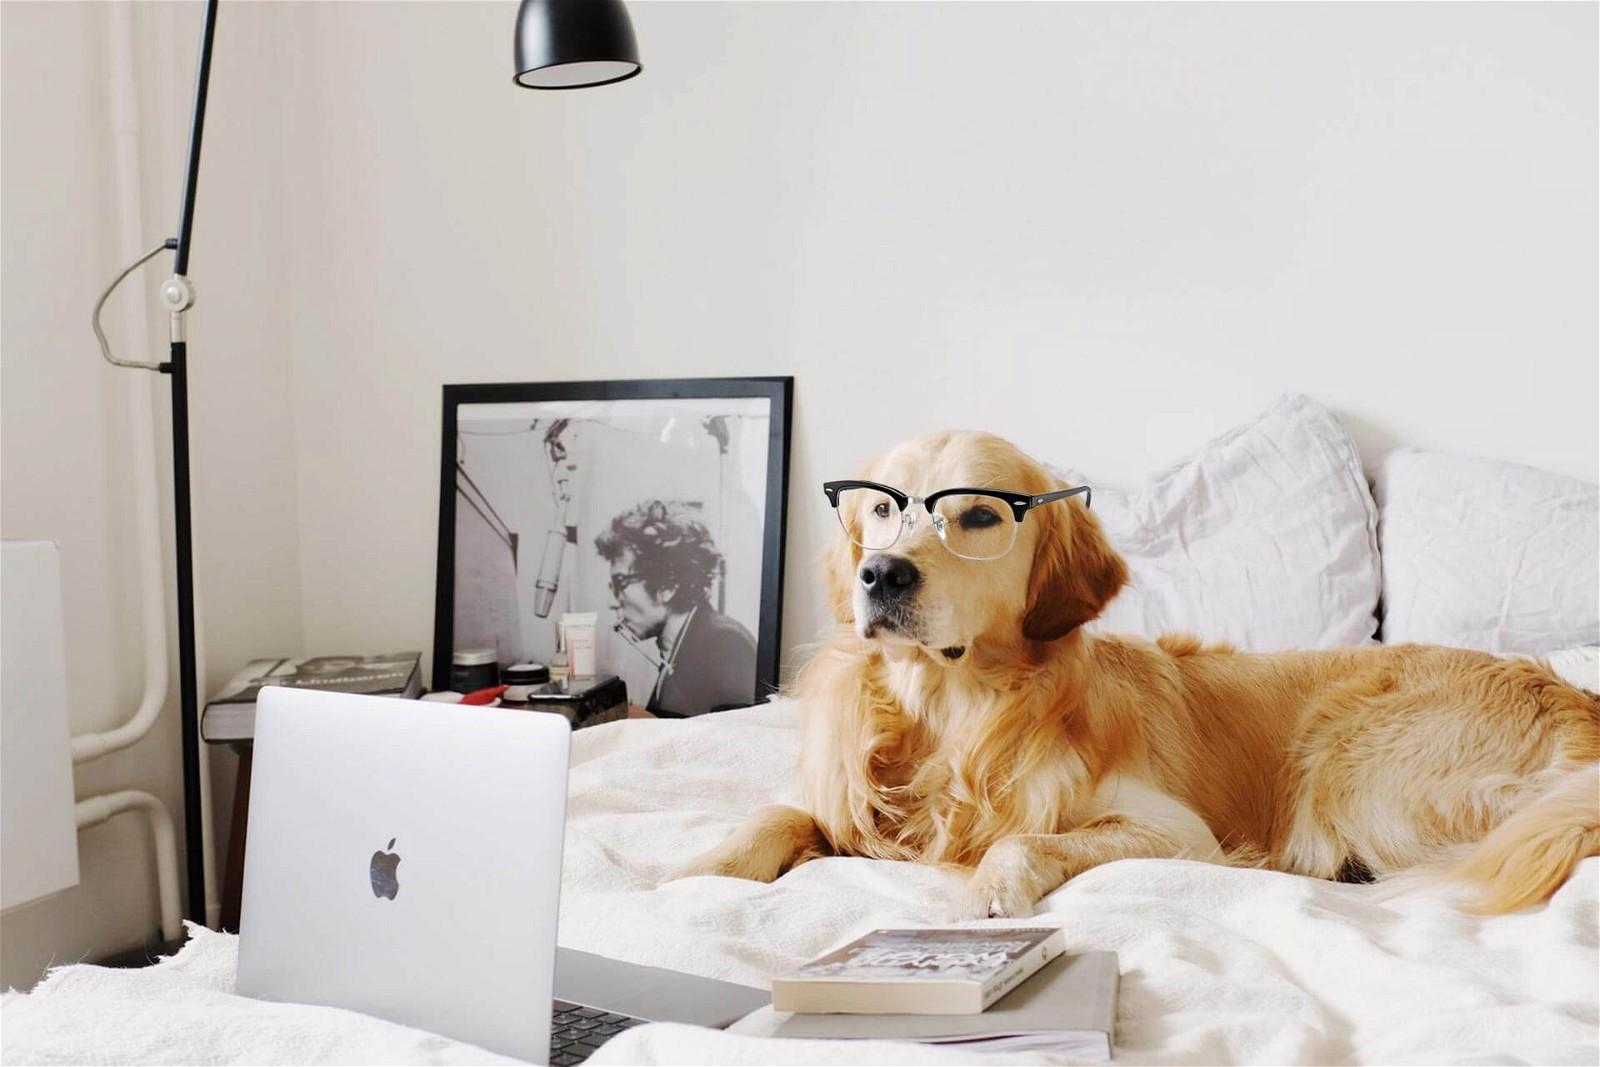 A dog wearing eyeglasses lies on a bed.